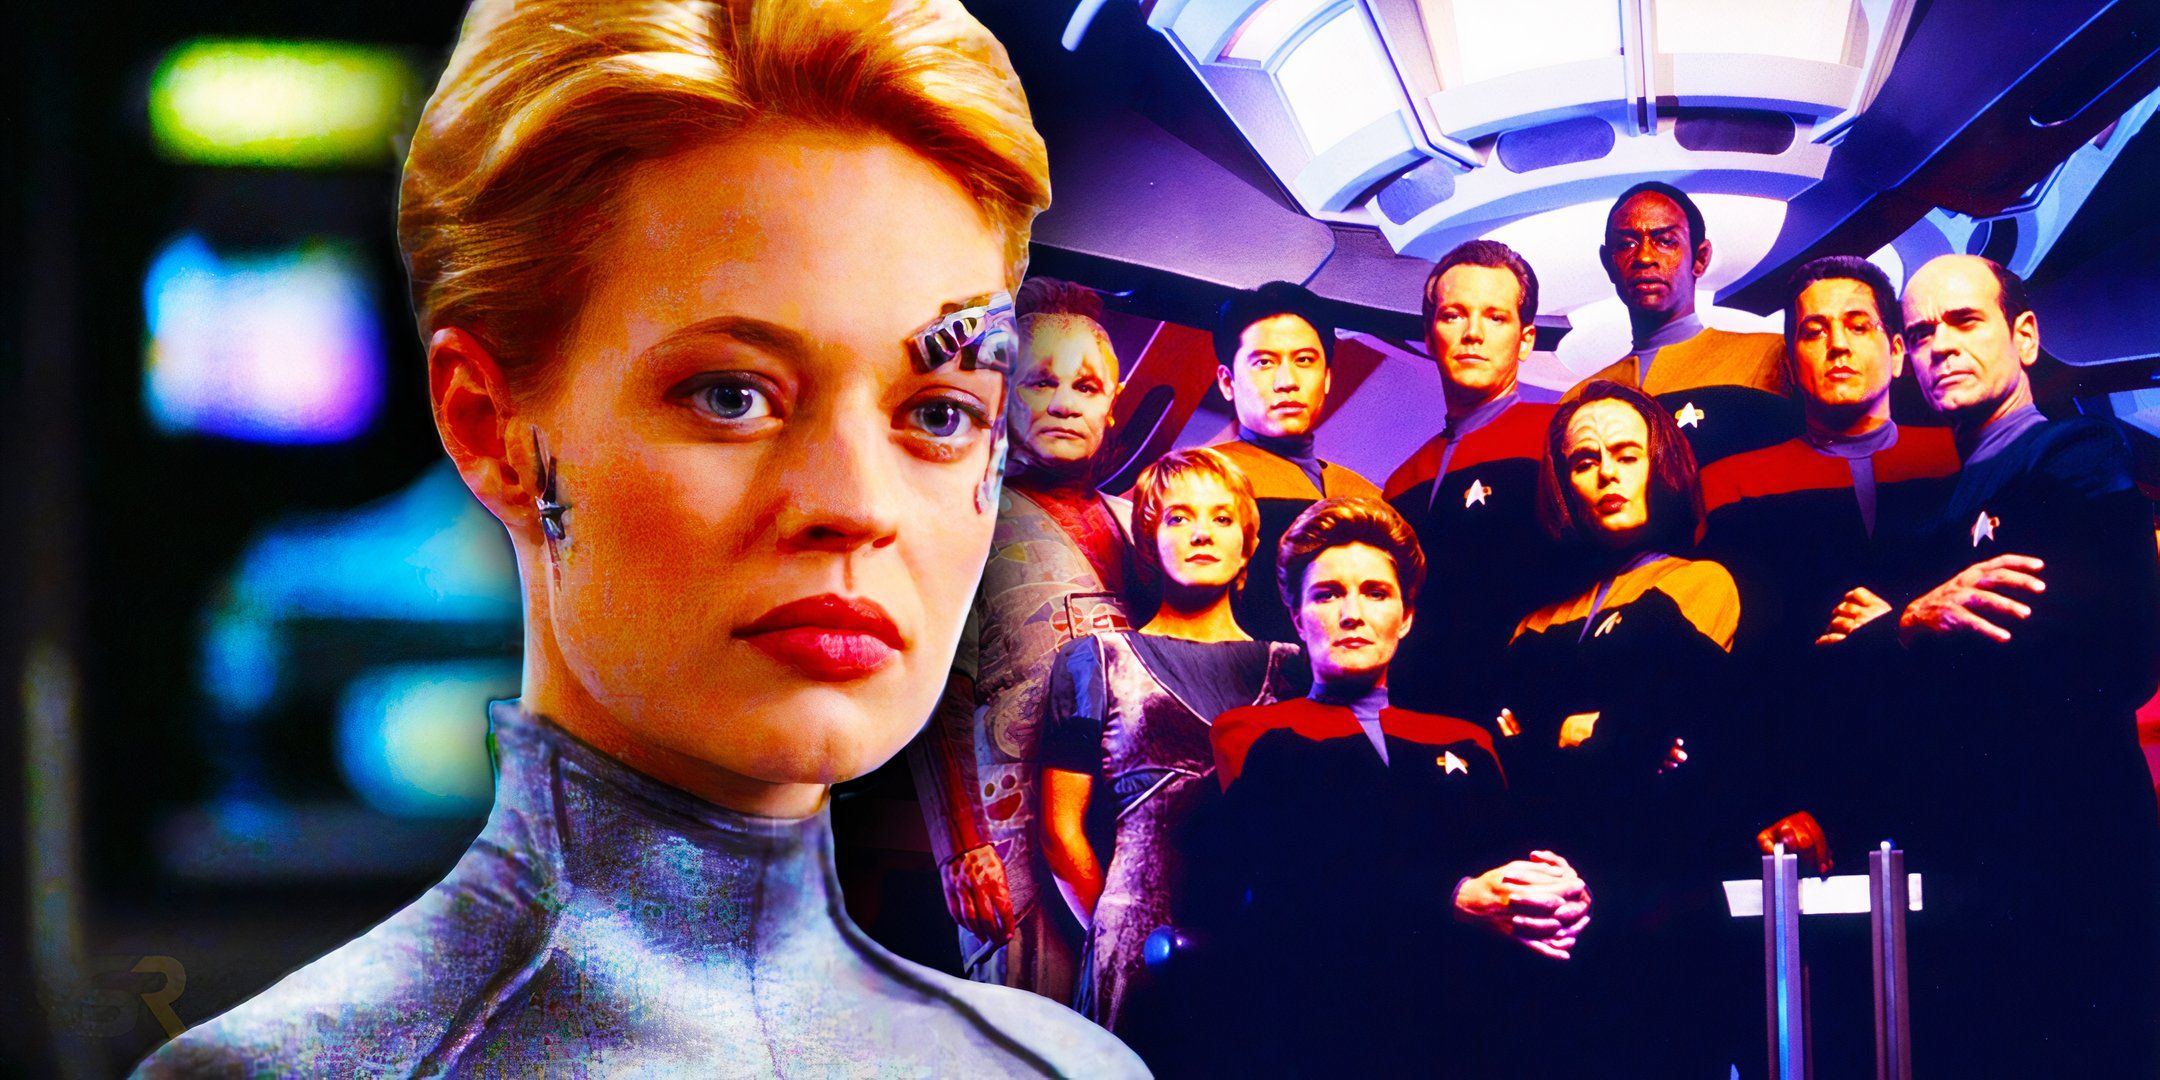 A collage of Seven of Nine in her silver outfit staring beyond the camera with the Star Trek: Voyager season 3 cast in the background.